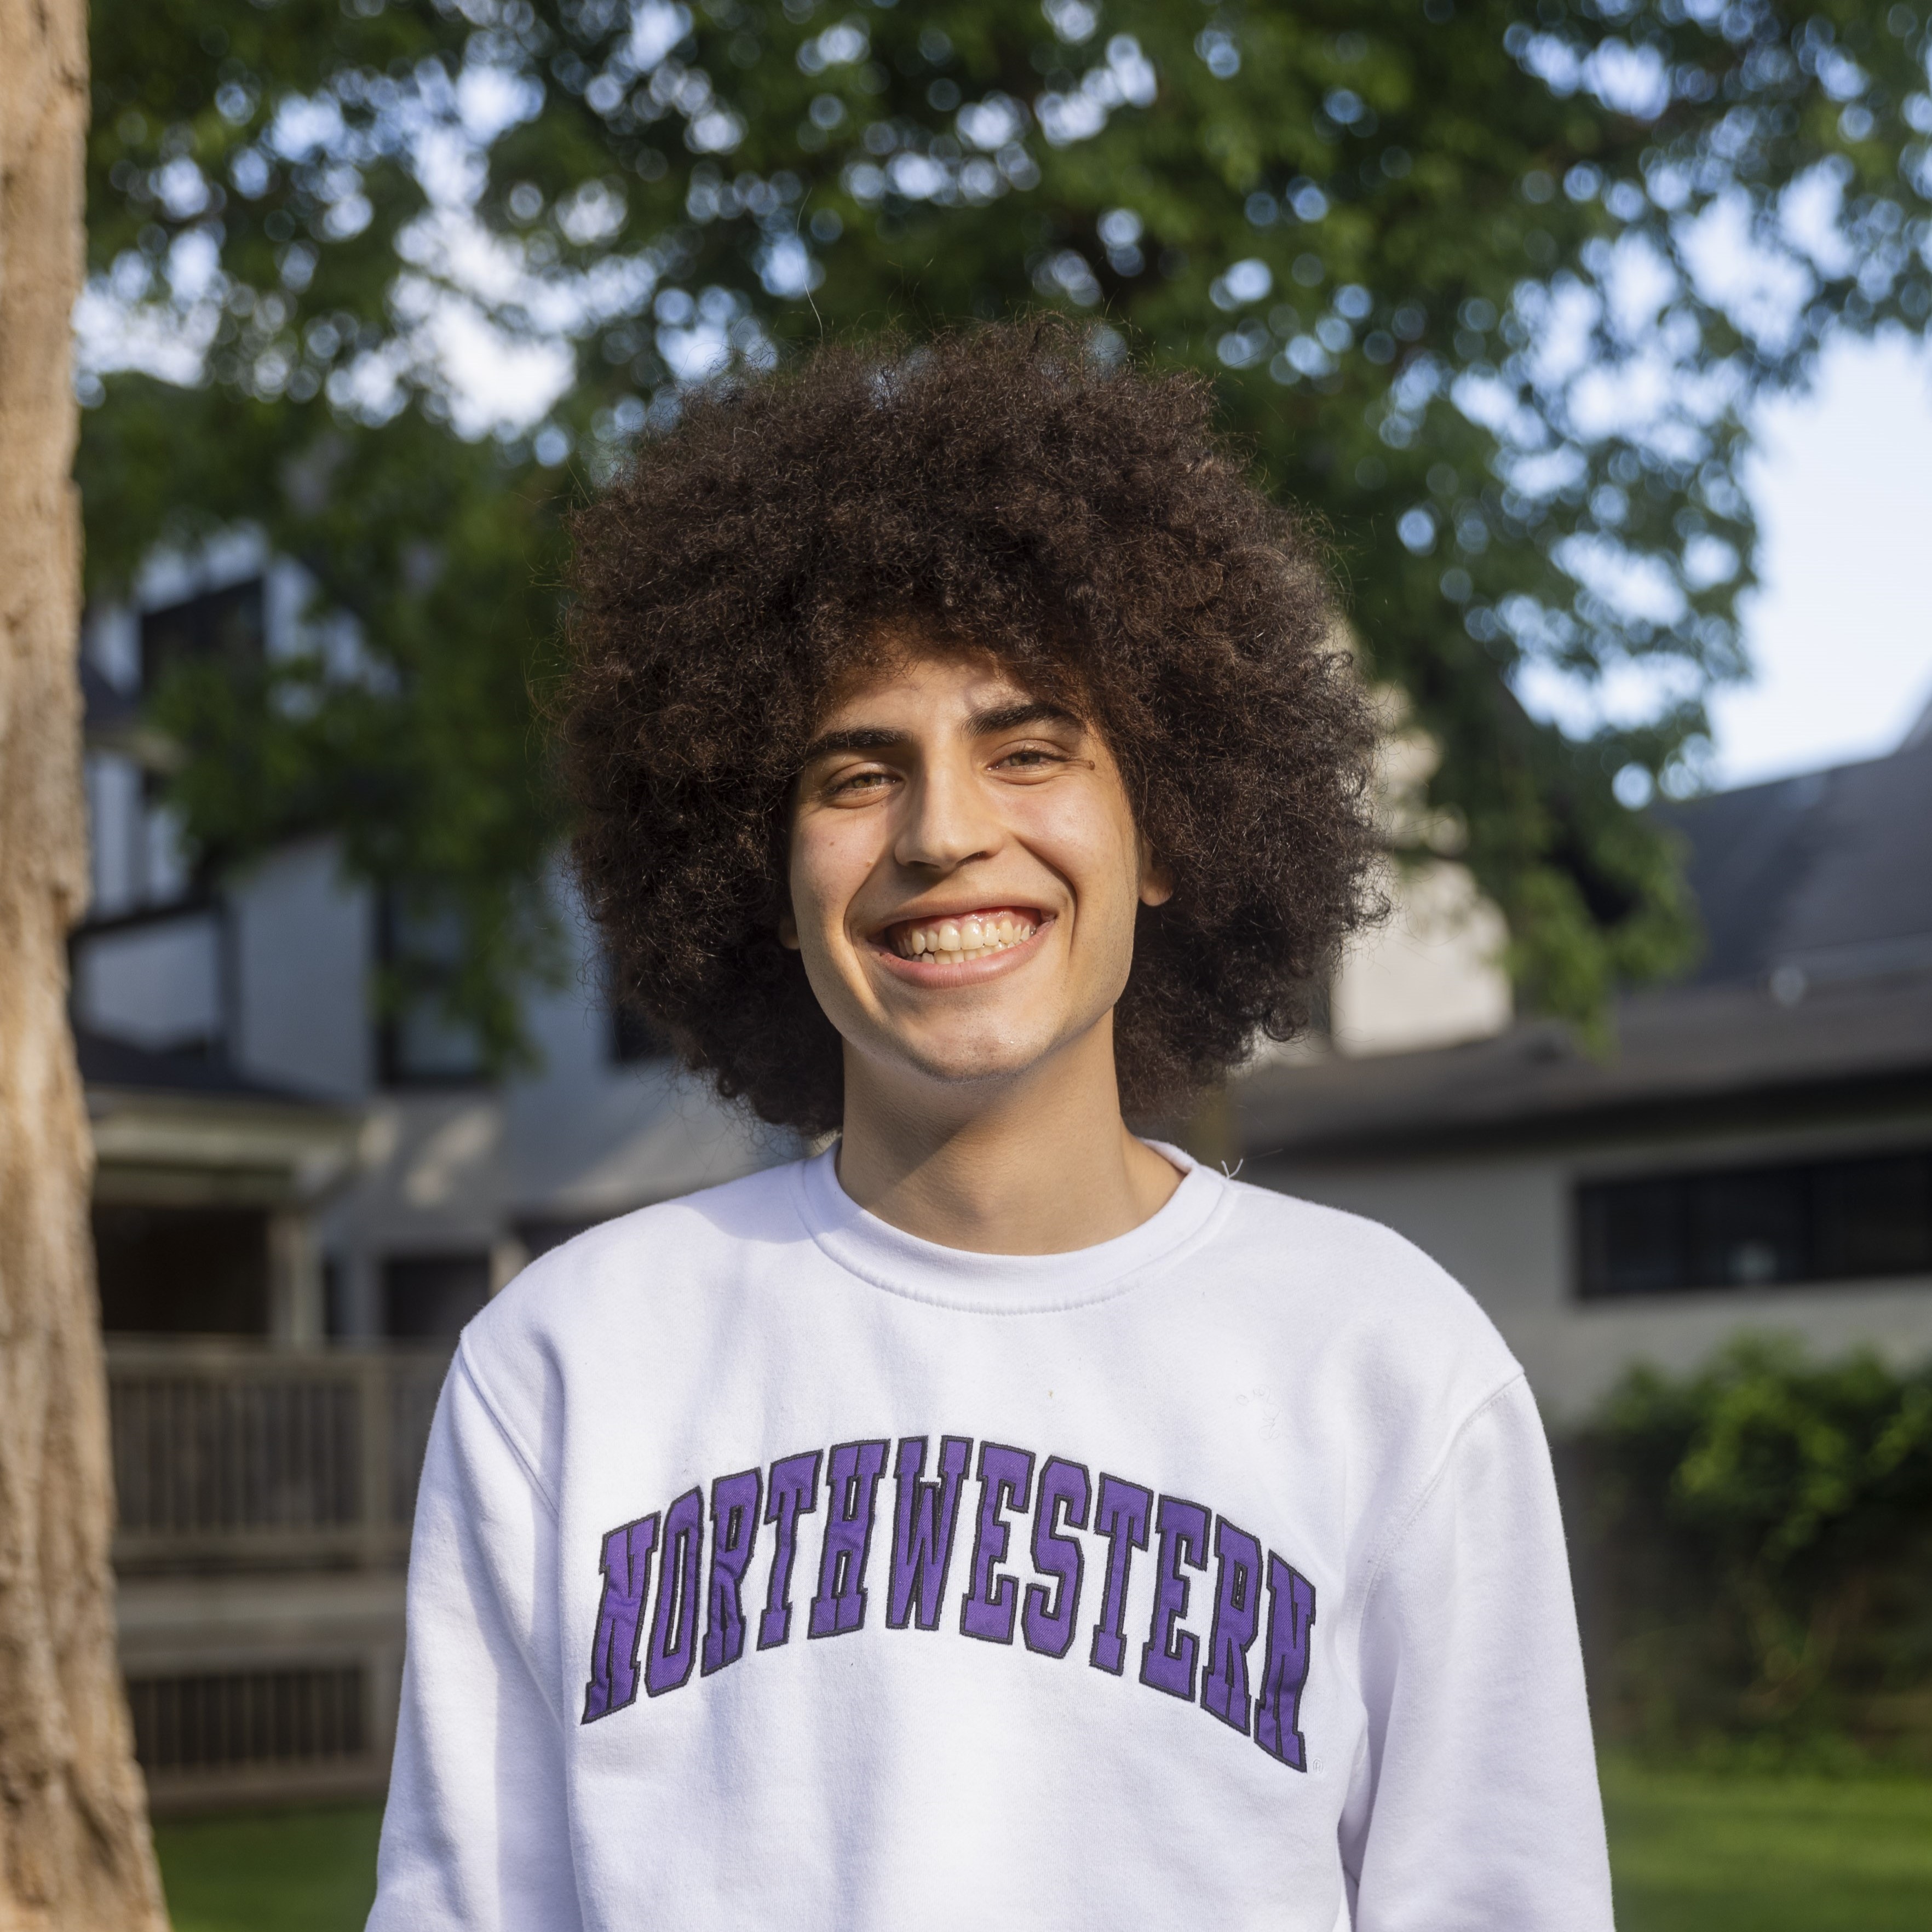 Eduardo is a second year Biology major and is the Biology subteam leader for AutoAquaponics project. He works to maintain the aquaponic system. He joined AutoAquaponics to merge his passions for living systems and sustainability.